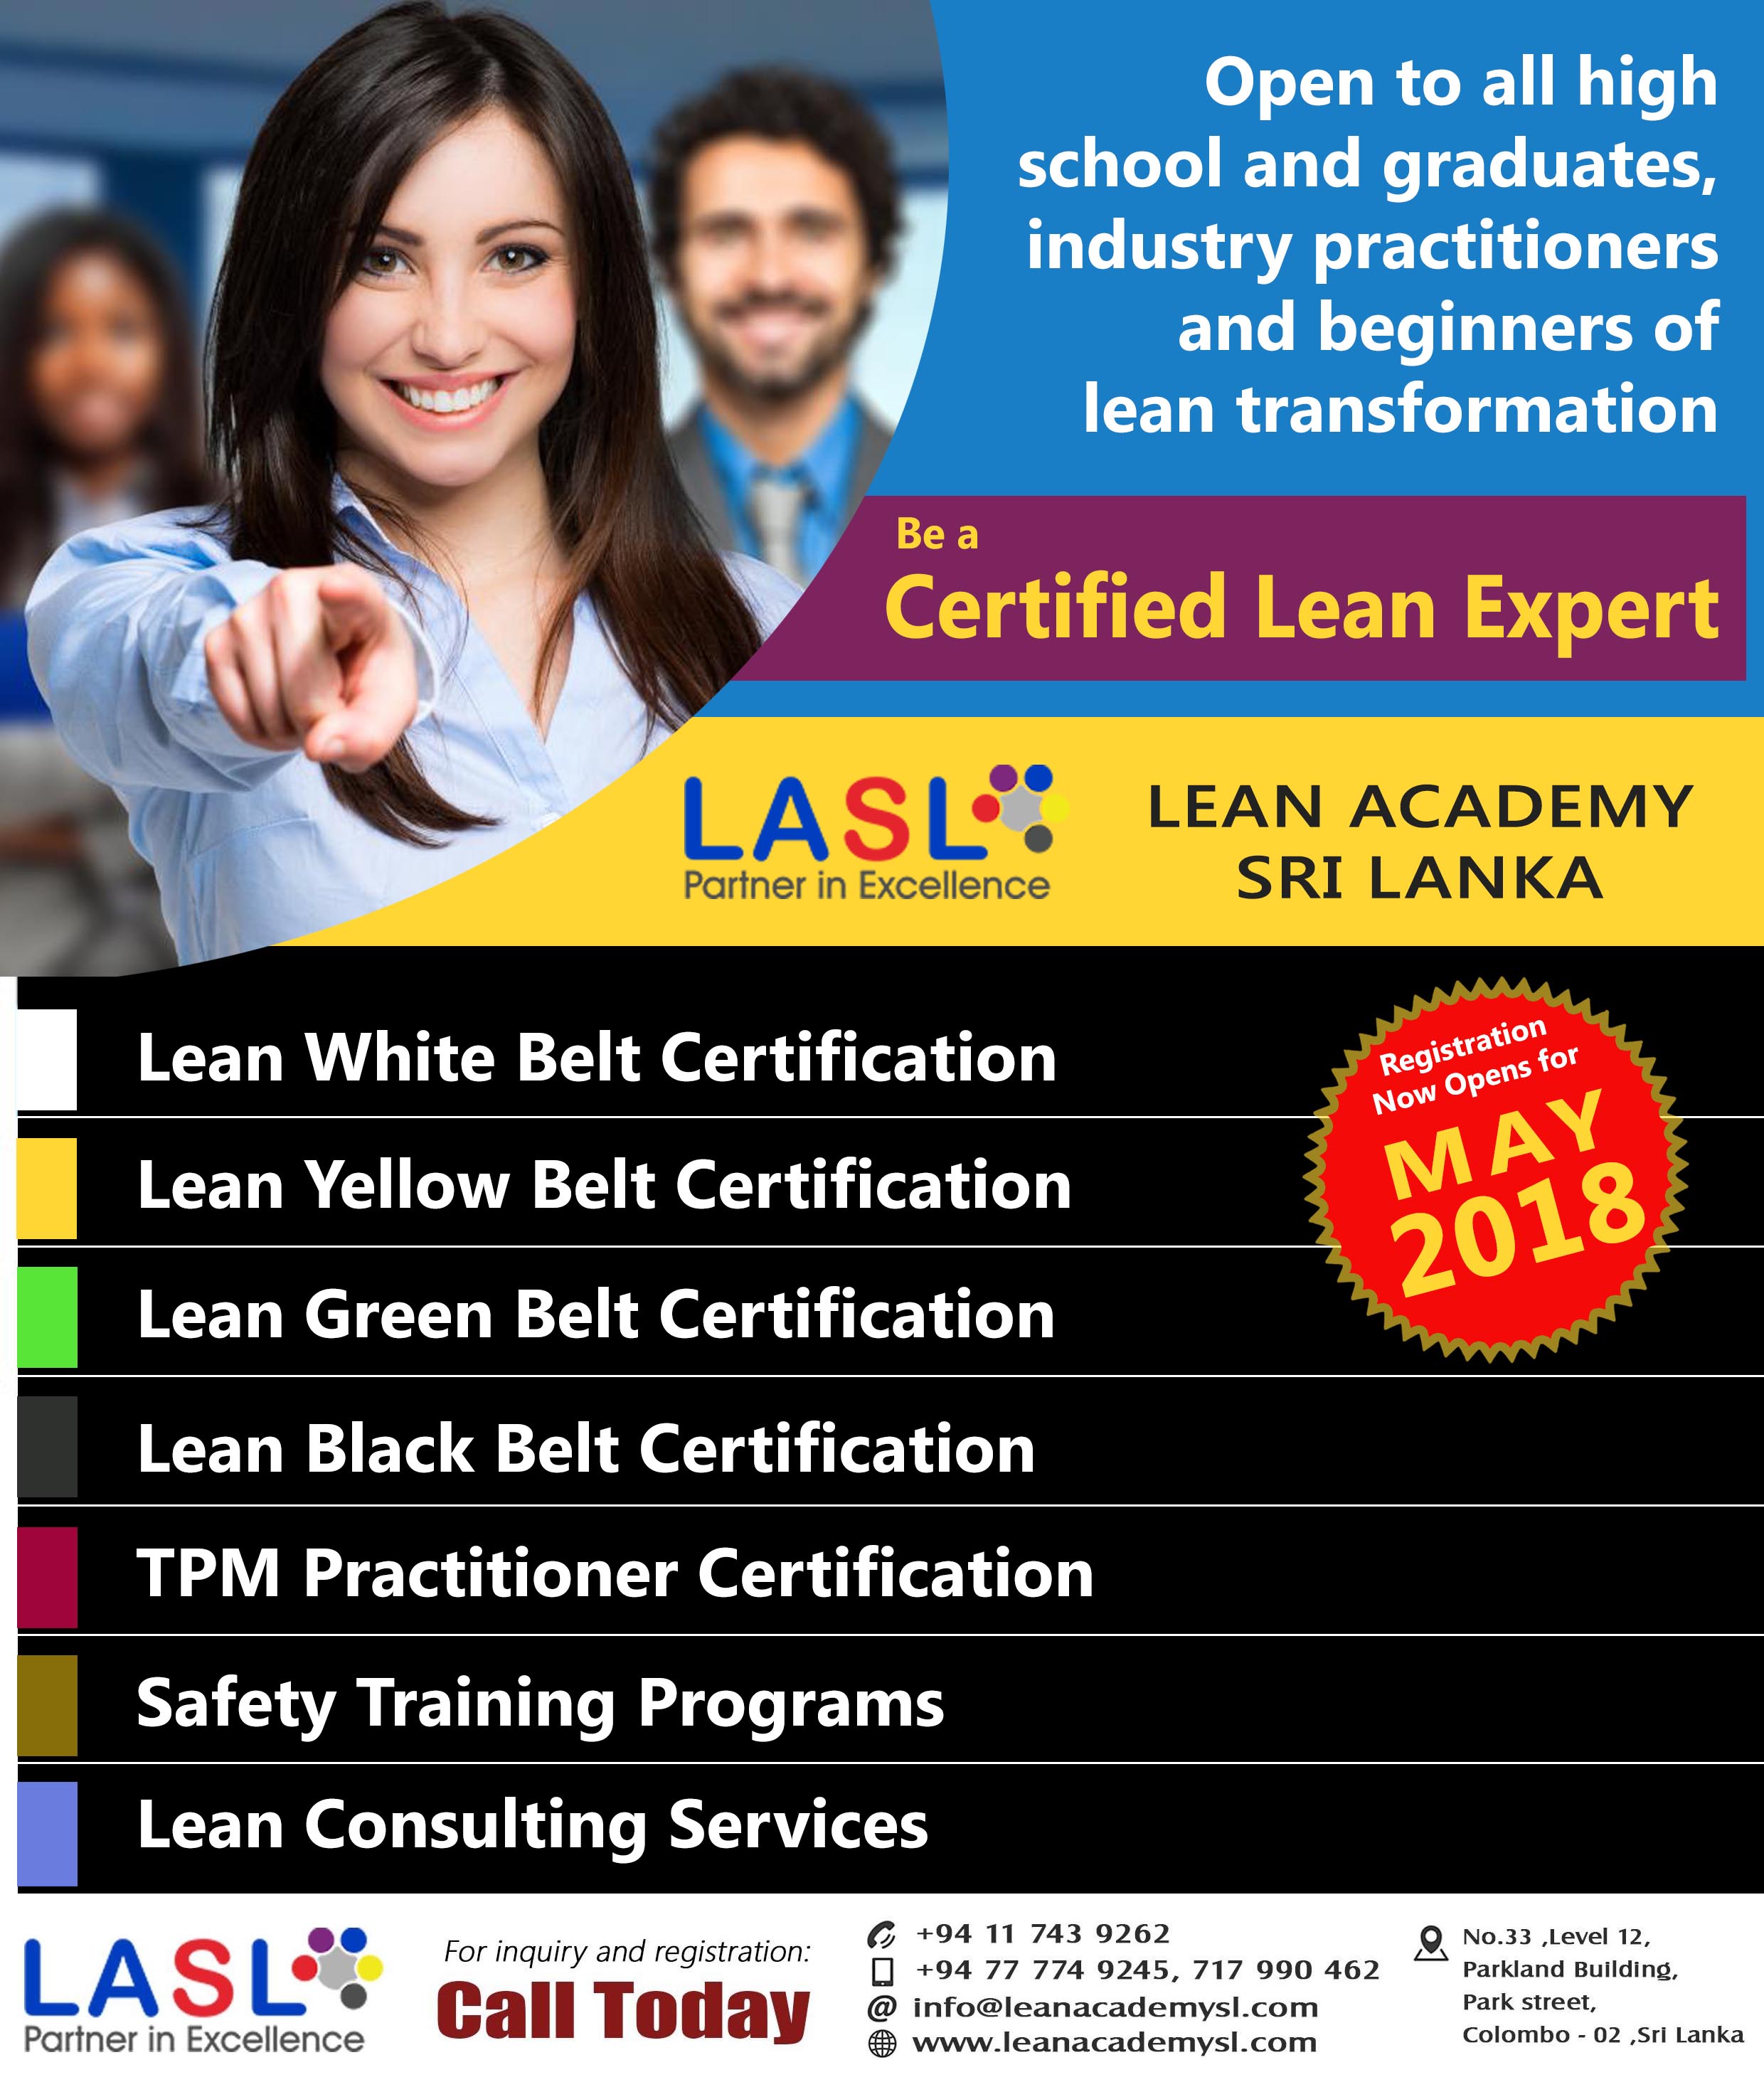 LASL Registrations Now Open for May 2018